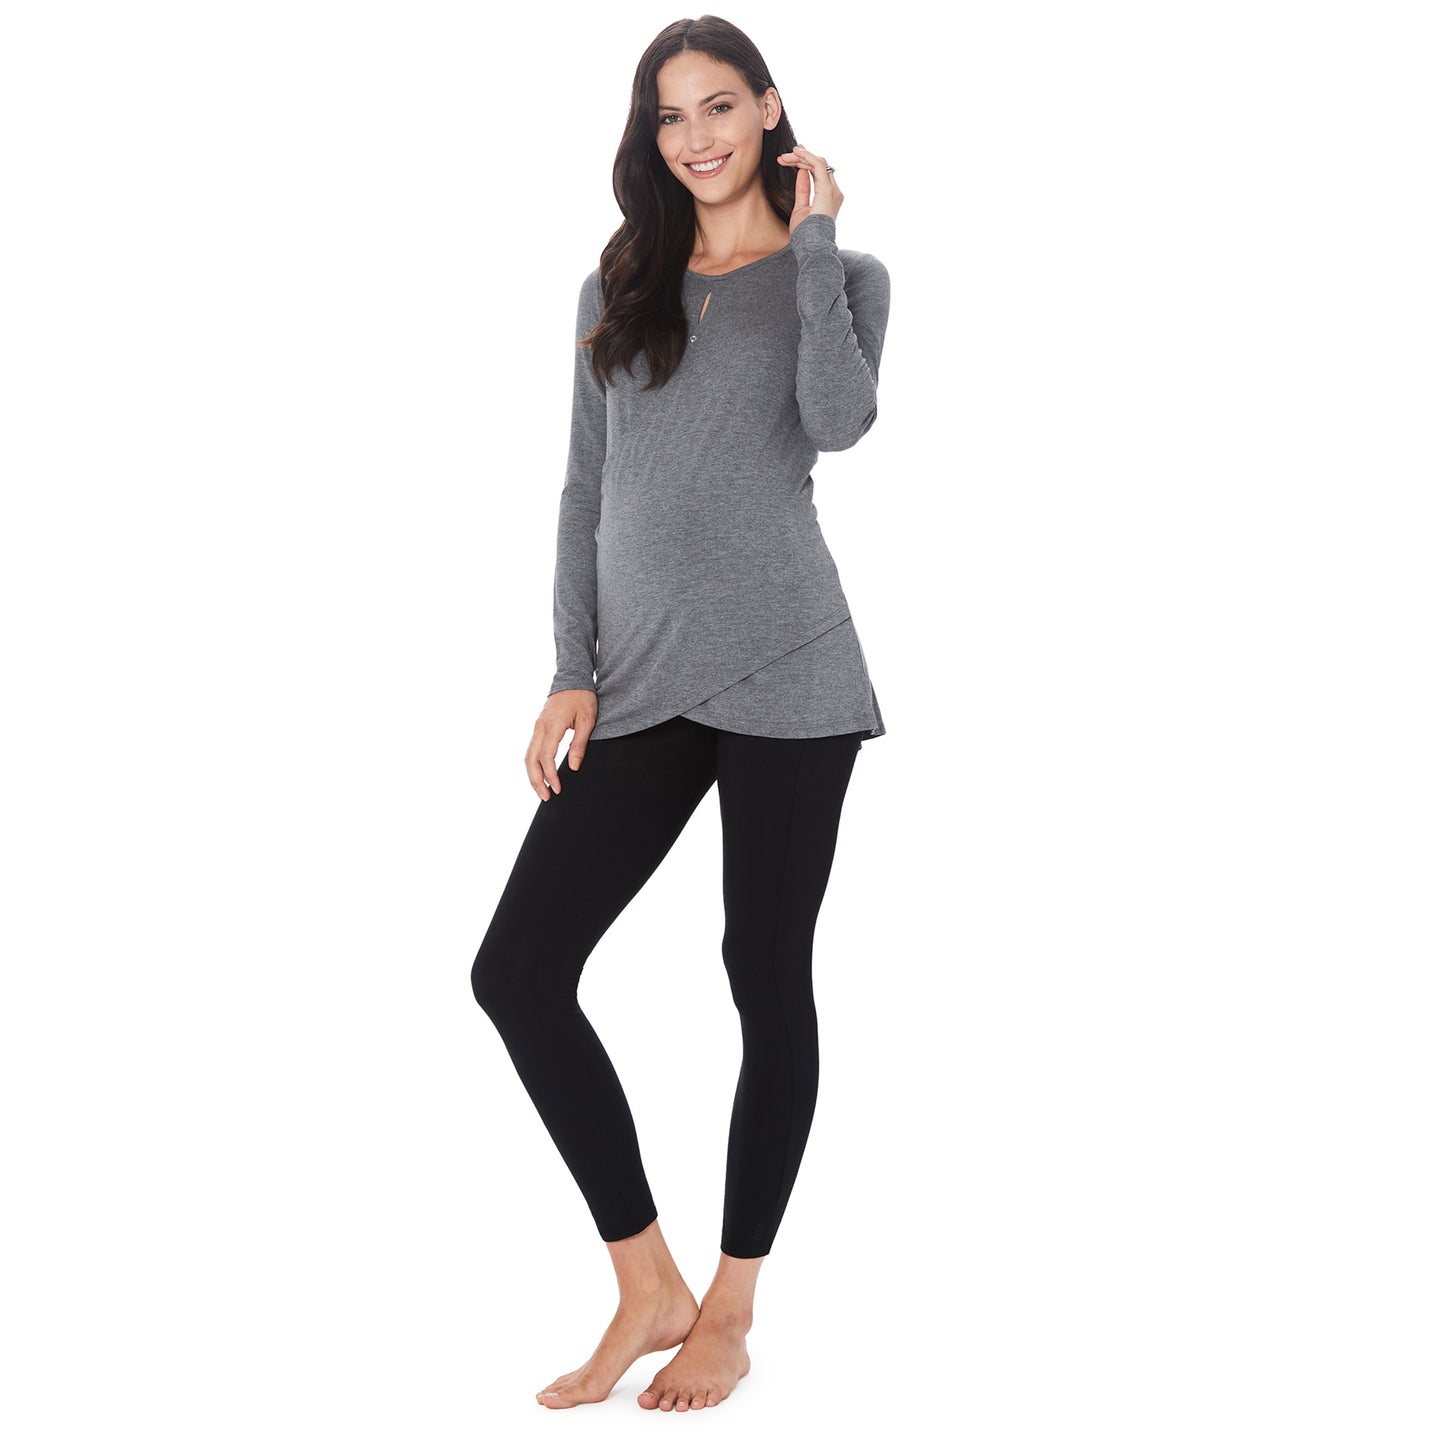  Charcoal Heather; Model is wearing size S. She is 5’11”, Bust 34”, Waist 25”, Hips 36.5”. @A lady wearing a charcoal heather long sleeve maternity wrap front top. #Model is wearing a maternity bump.